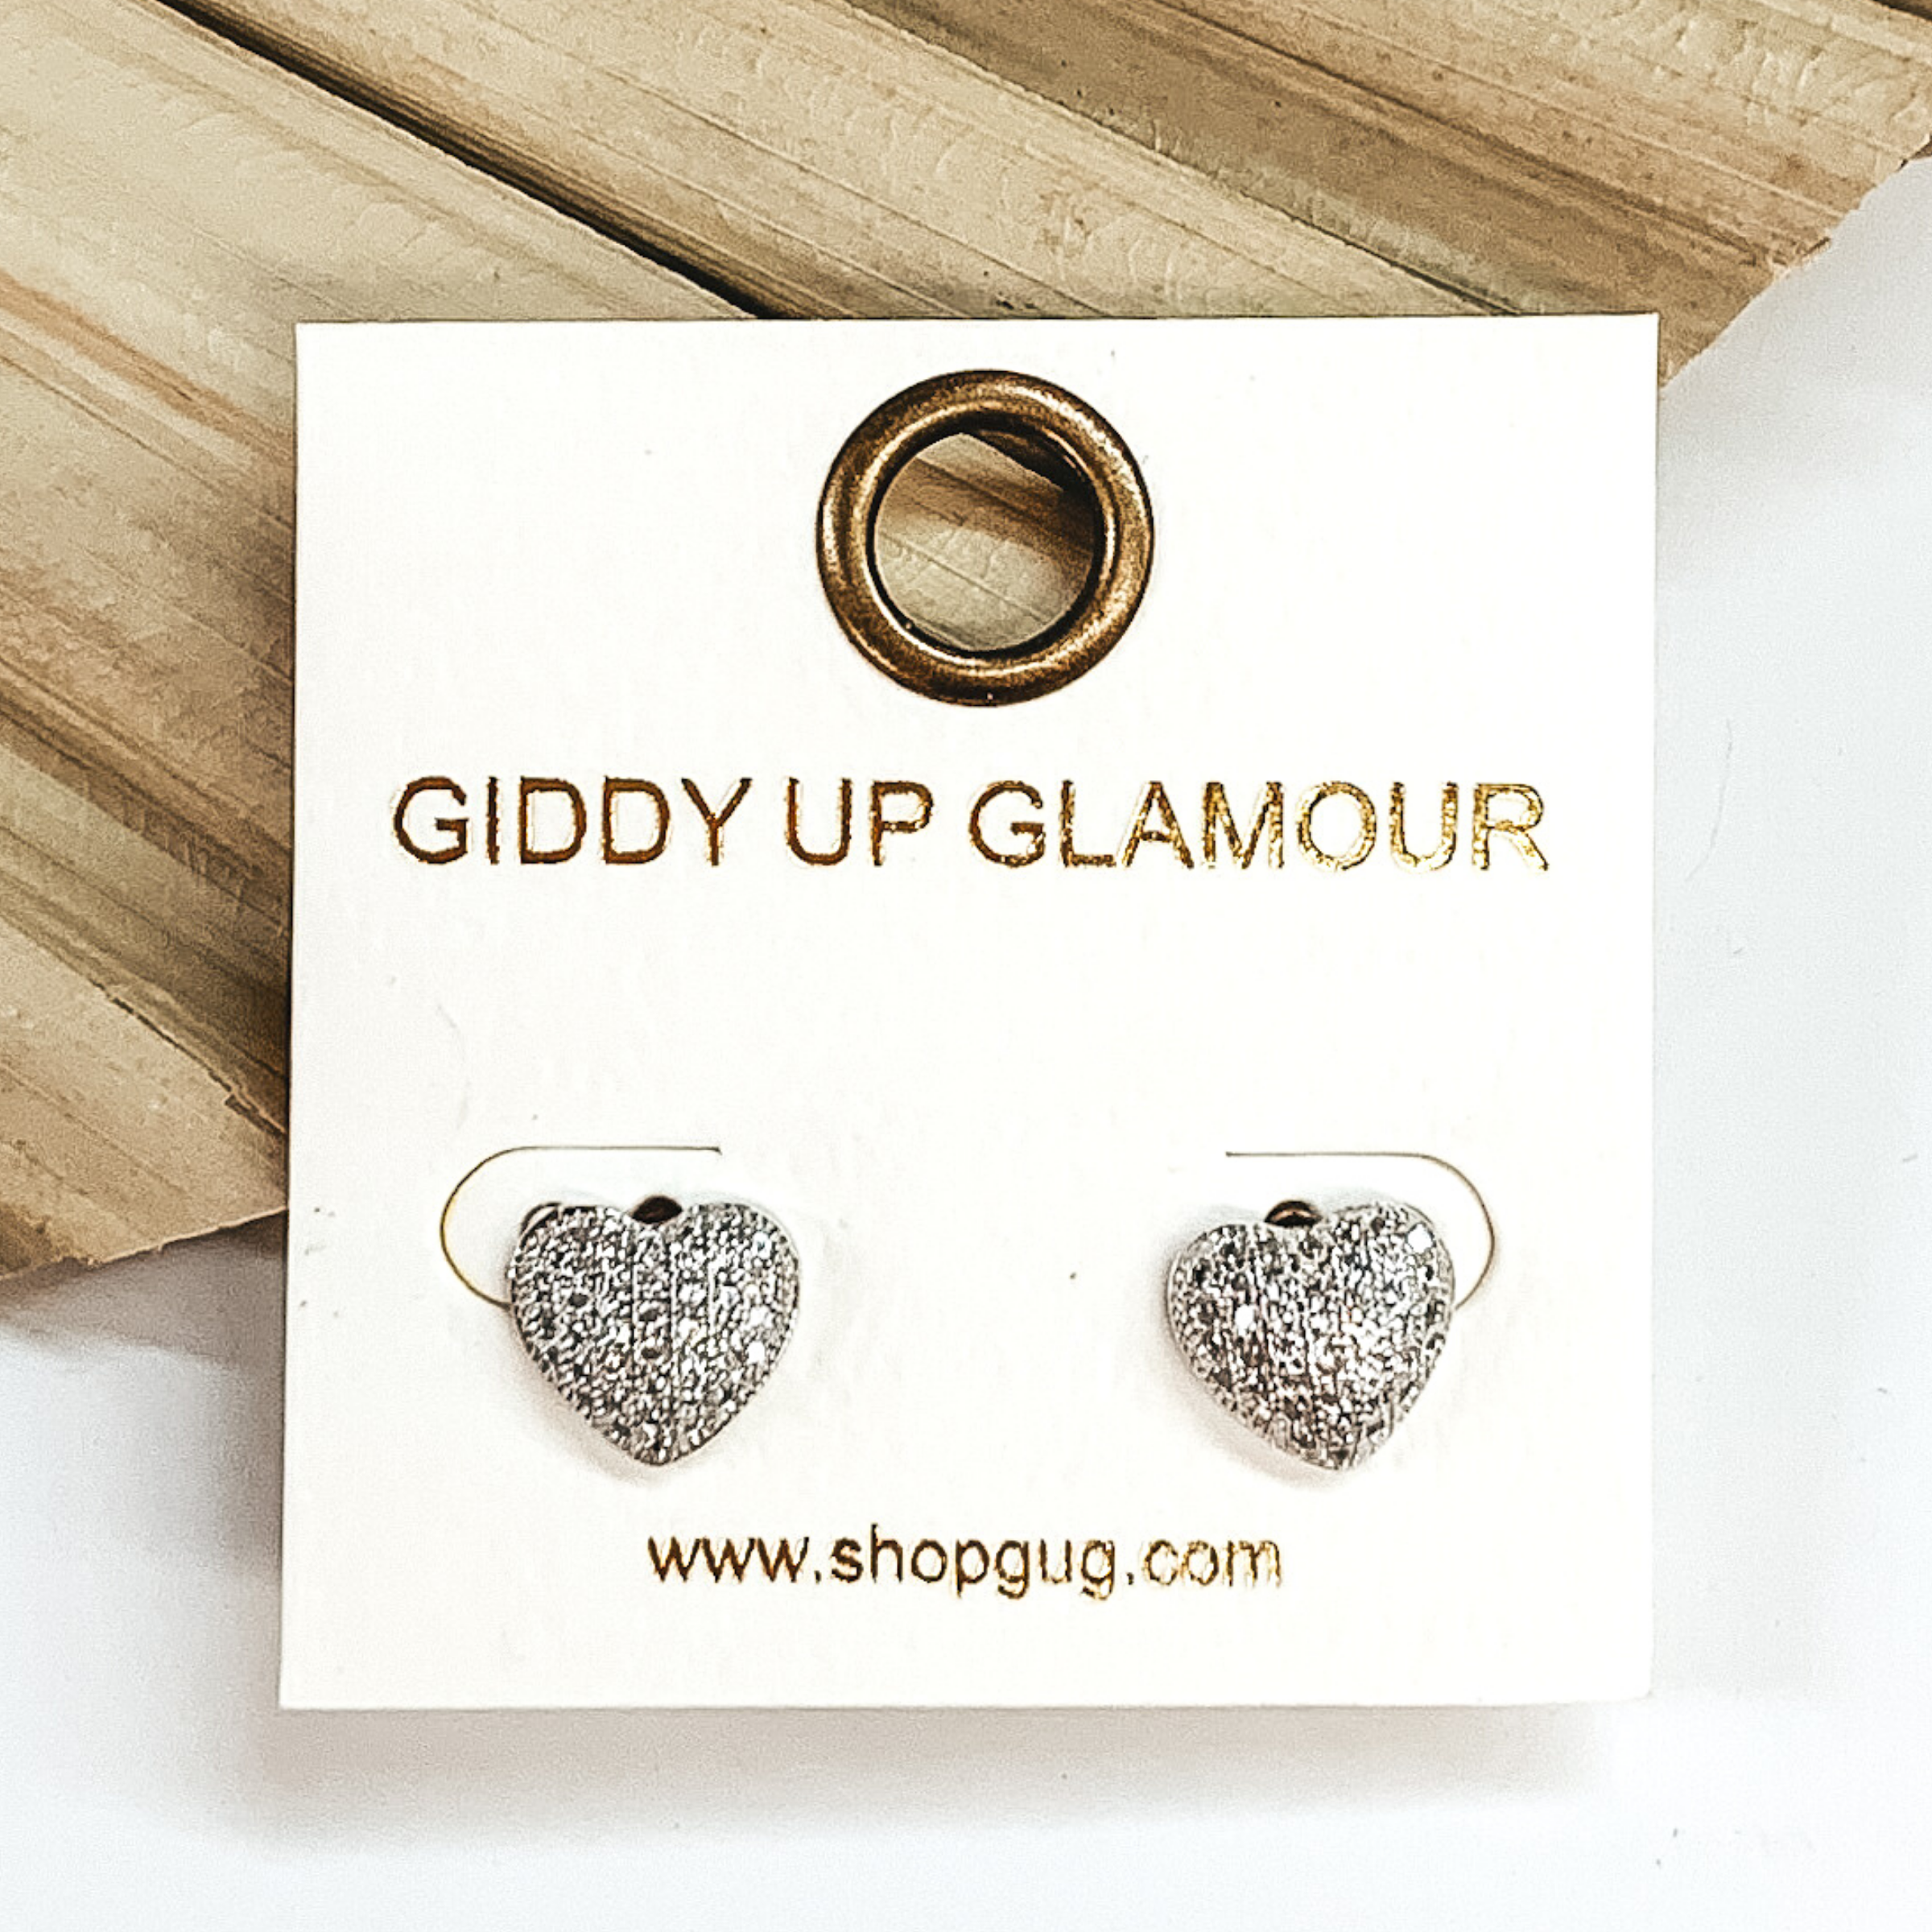 Clear crystal heart stud earrings in silver. These earrings are pictured laying on a green palm leaf on a white background.